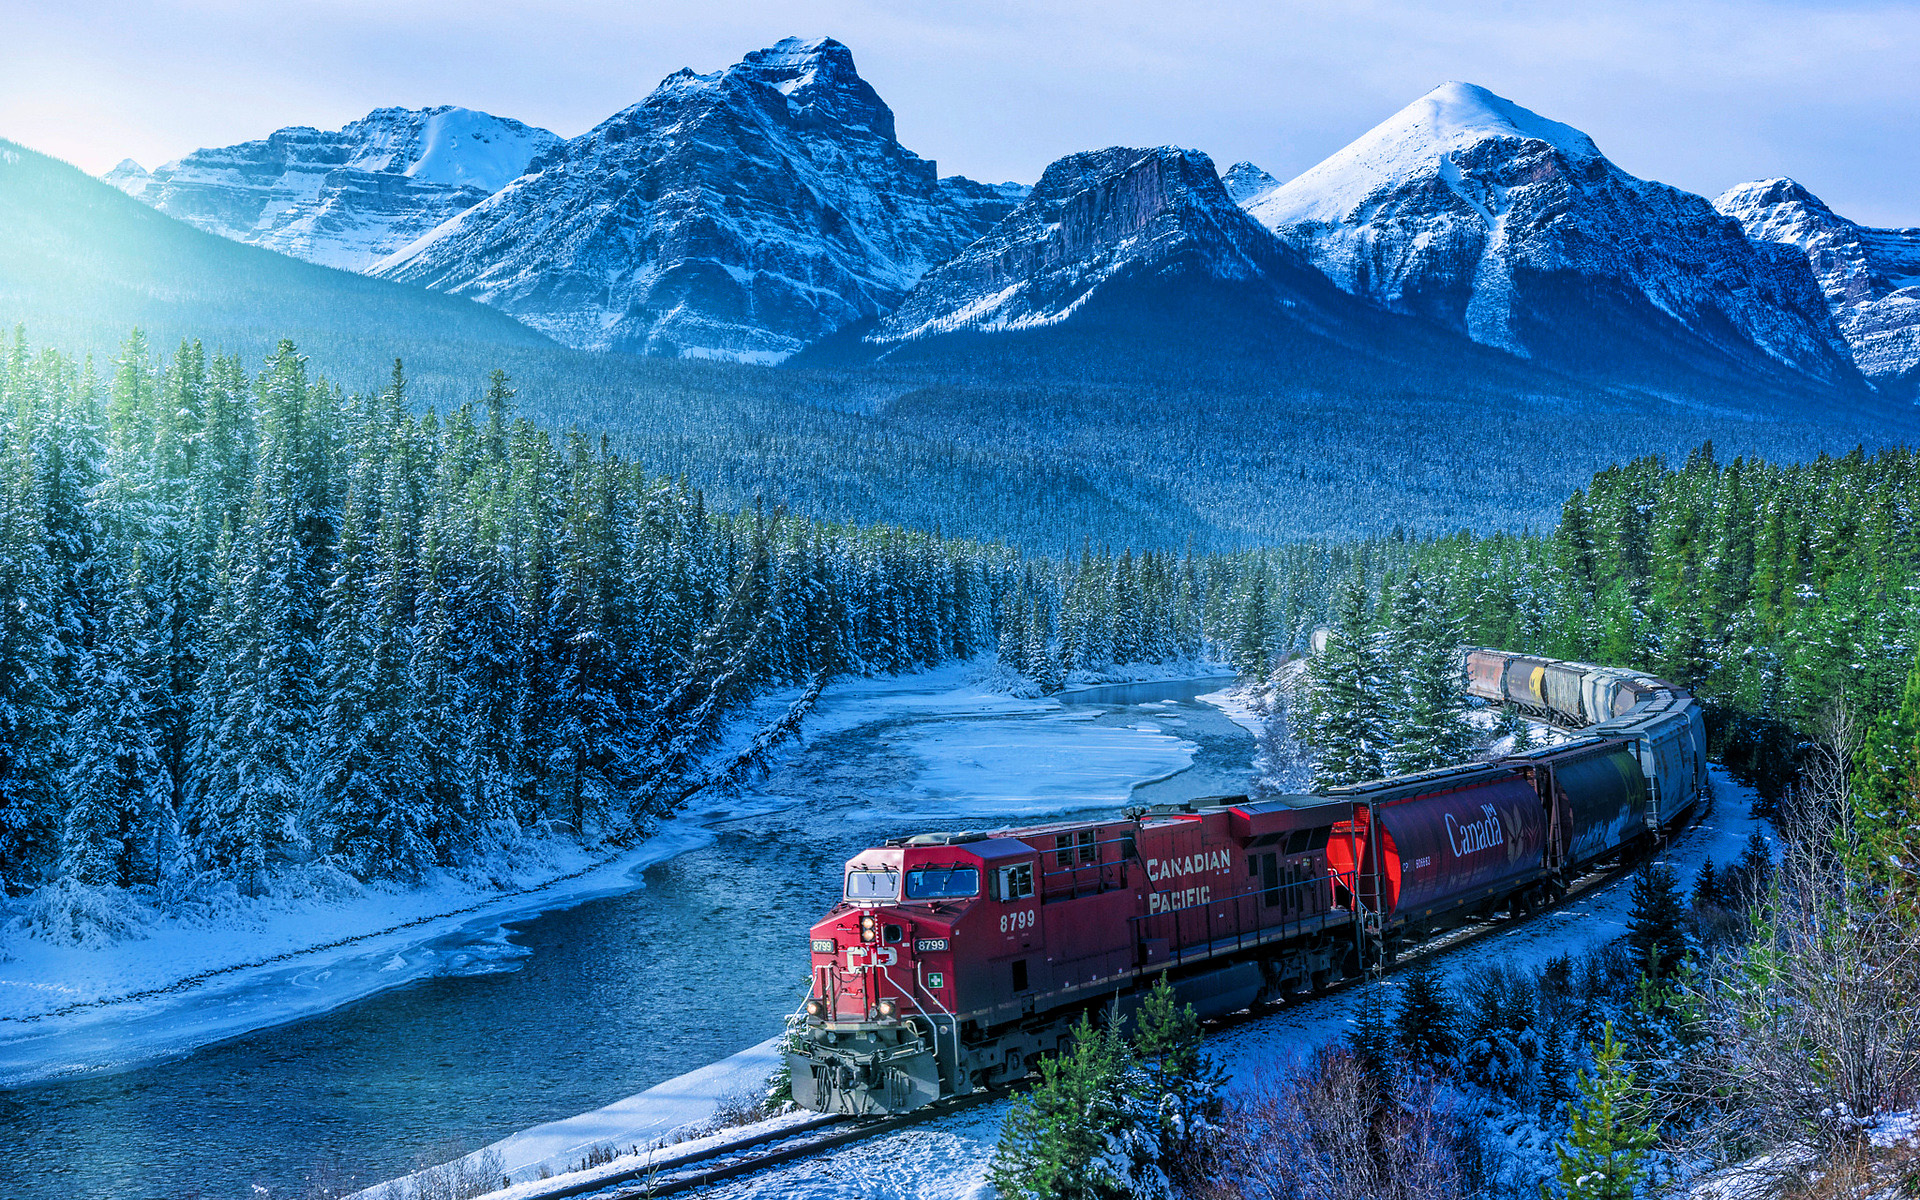 Download wallpaper Canada, winter, beautiful nature, railway, cargo train, mountains, lake, Canadian Pacific Railway, North America, HDR for desktop with resolution 1920x1200. High Quality HD picture wallpaper